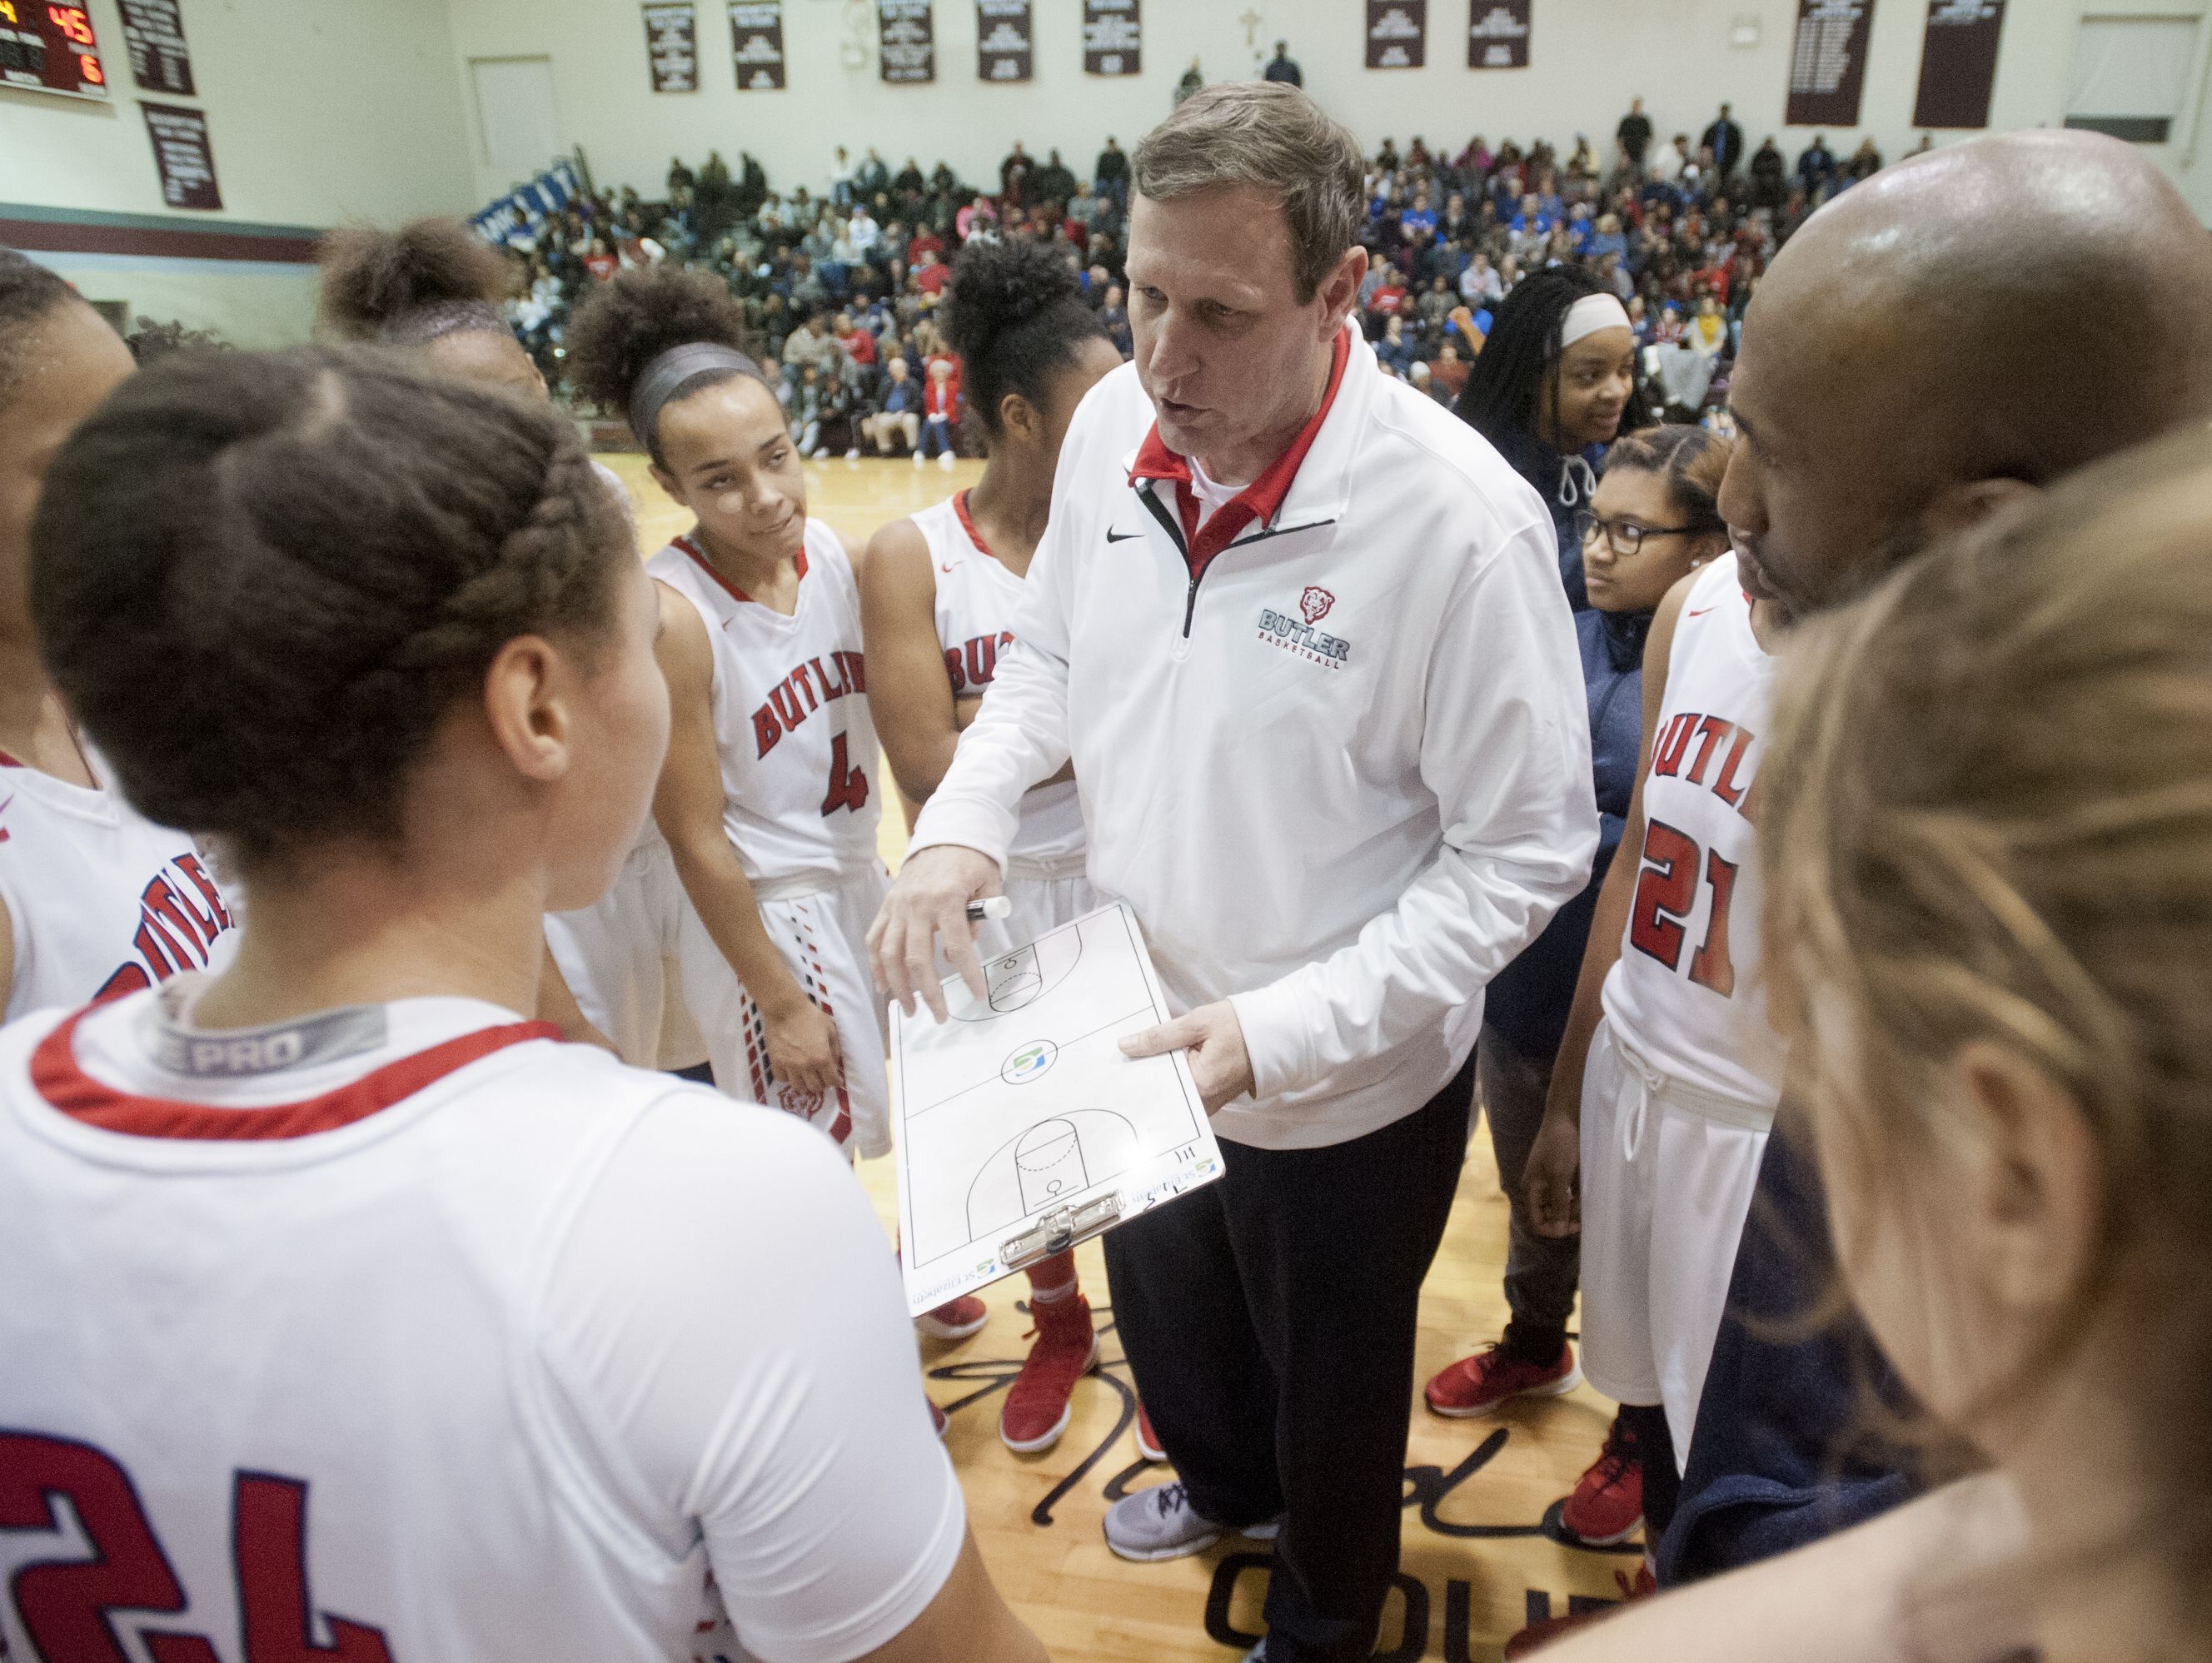 Butler head basketball coach Larry Just charts a play during a time-out in the Girls' LIT championship. 28 January 2017